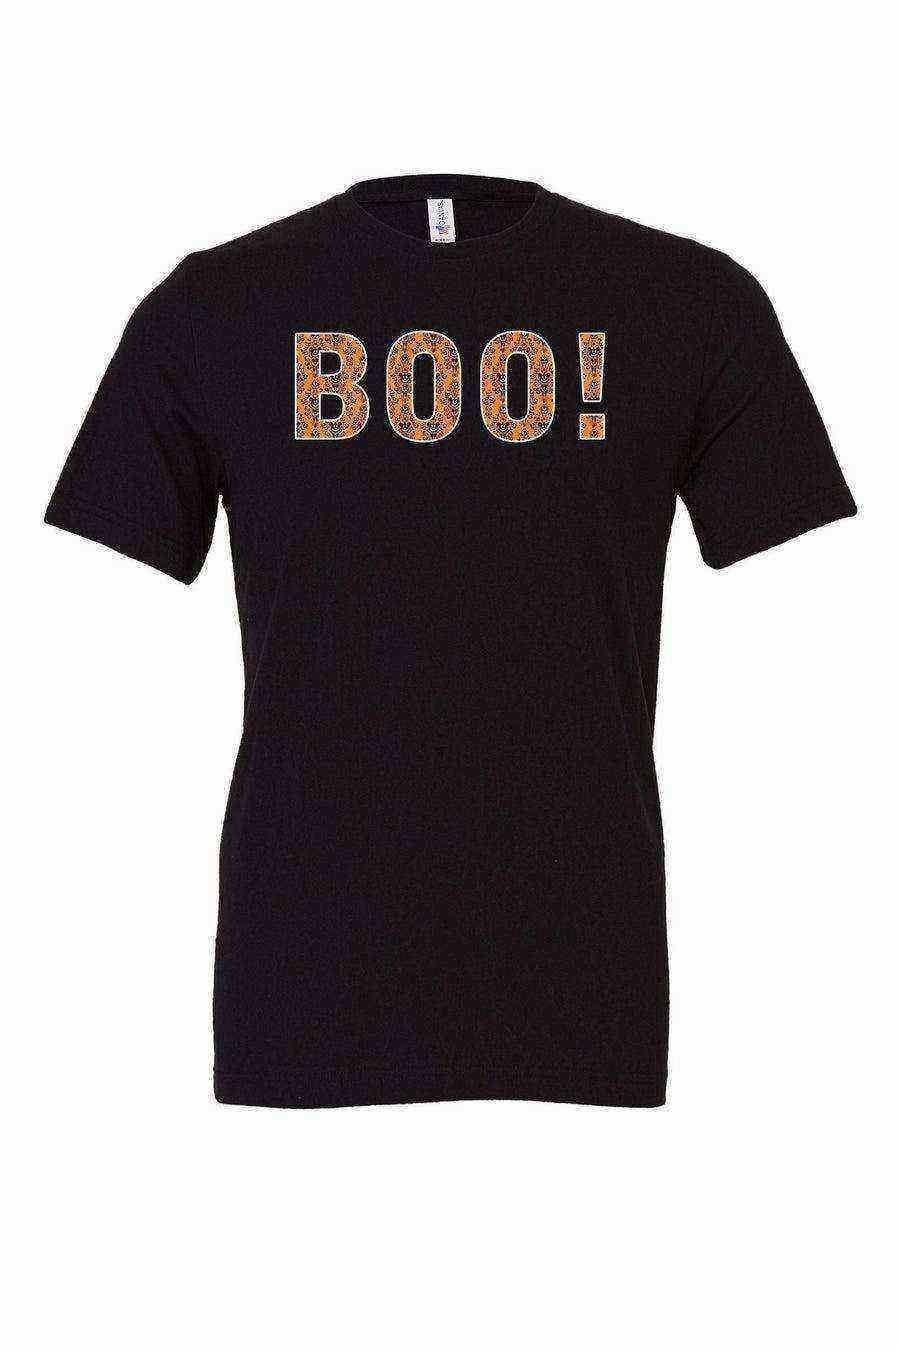 Youth | Boo Haunted Mansion Print Tee | Halloween - Dylan's Tees